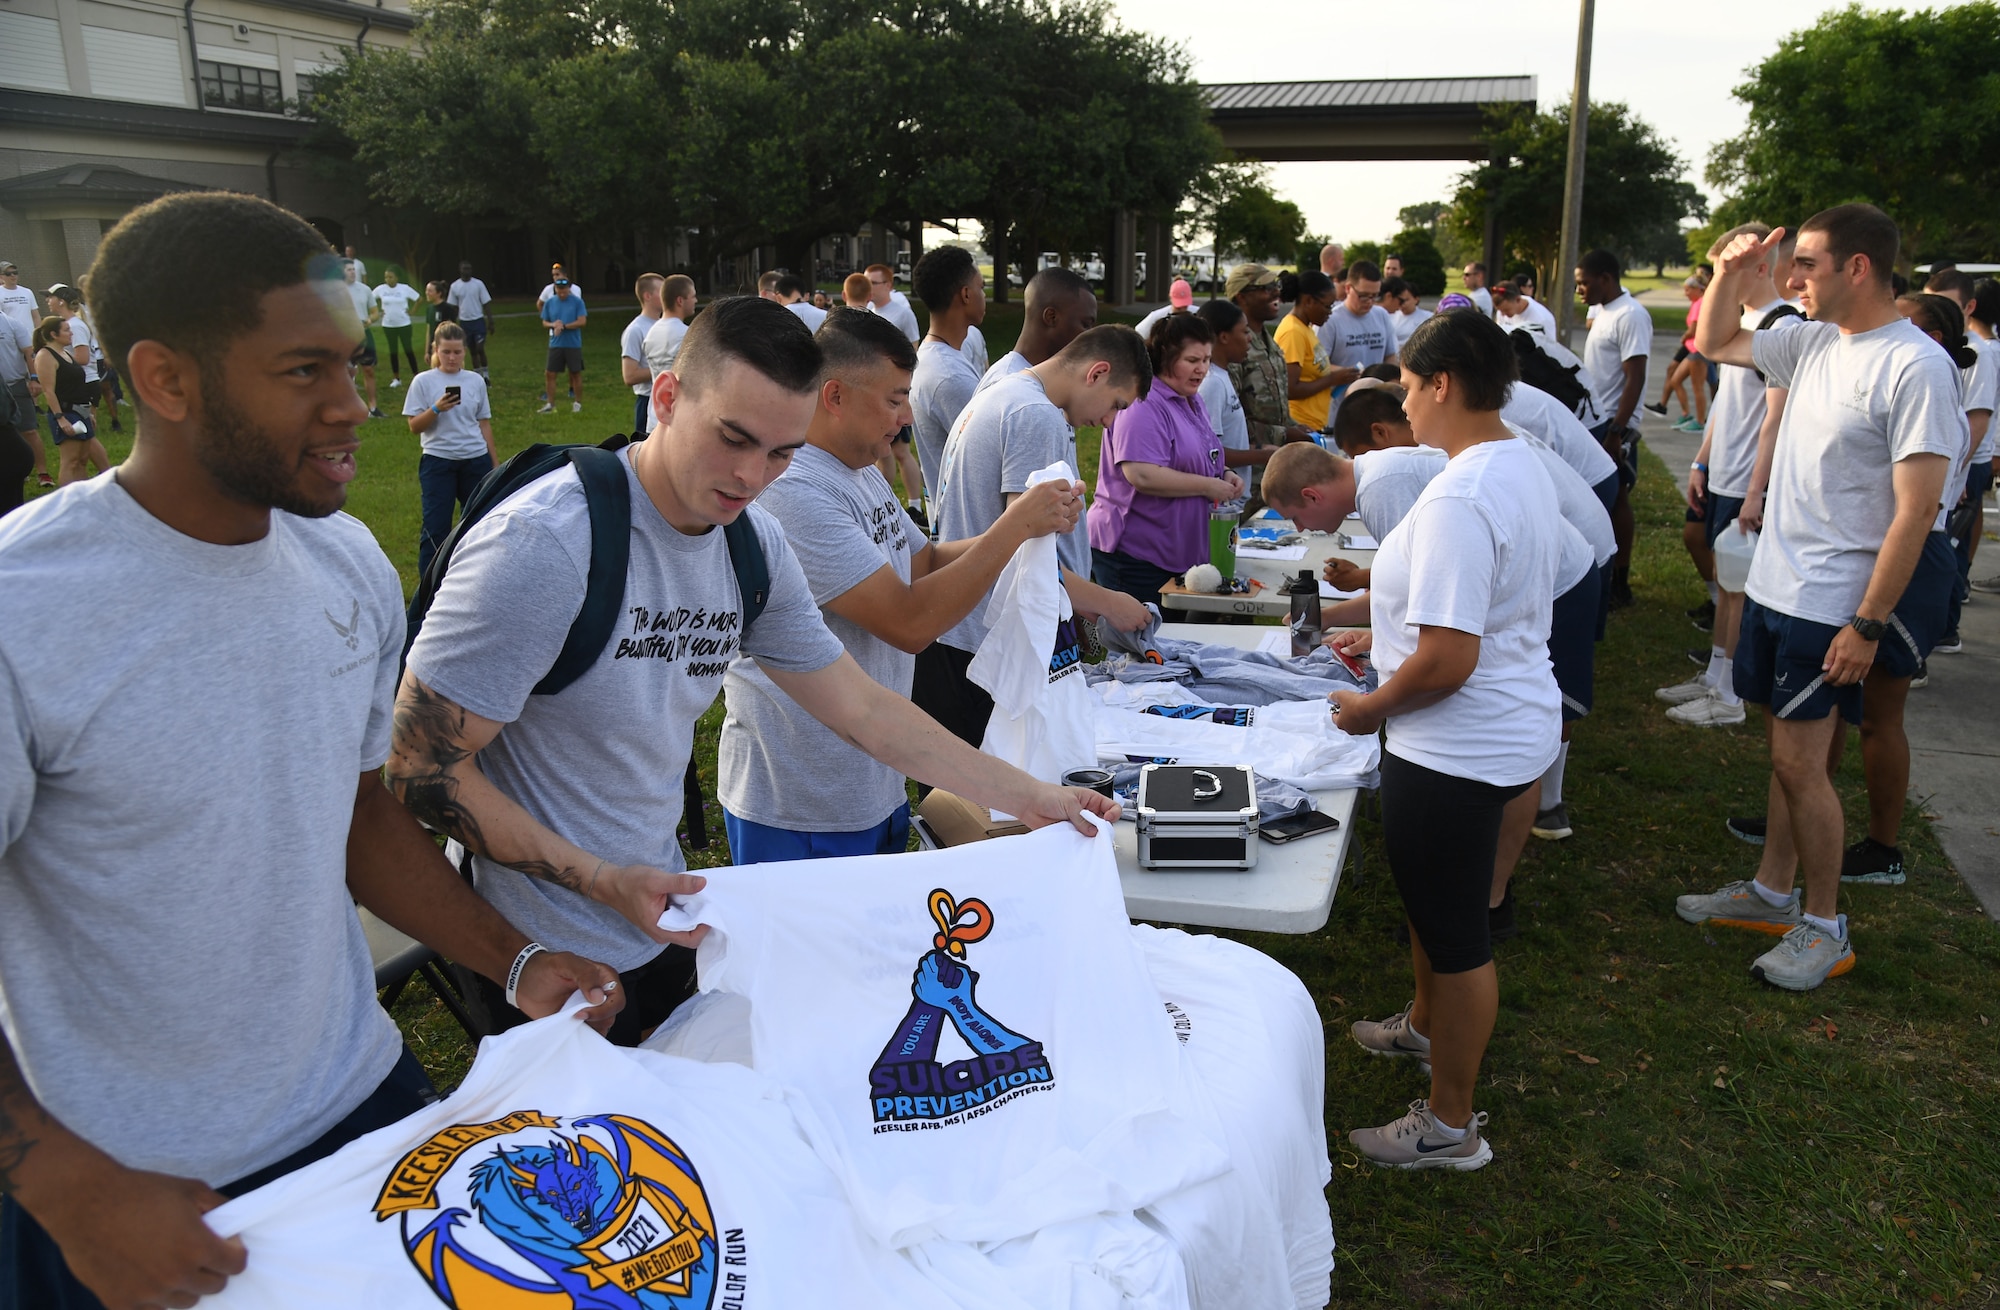 Keesler personnel sign up to participate in the Suicide Prevention Color Run at marina park at Keesler Air Force Base, Mississippi, June 16, 2022. More than 250 runners and 70 volunteers participated in the Air Force Sergeants Association Chapter 652 hosted event. (U.S. Air Force photo by Kemberly Groue)